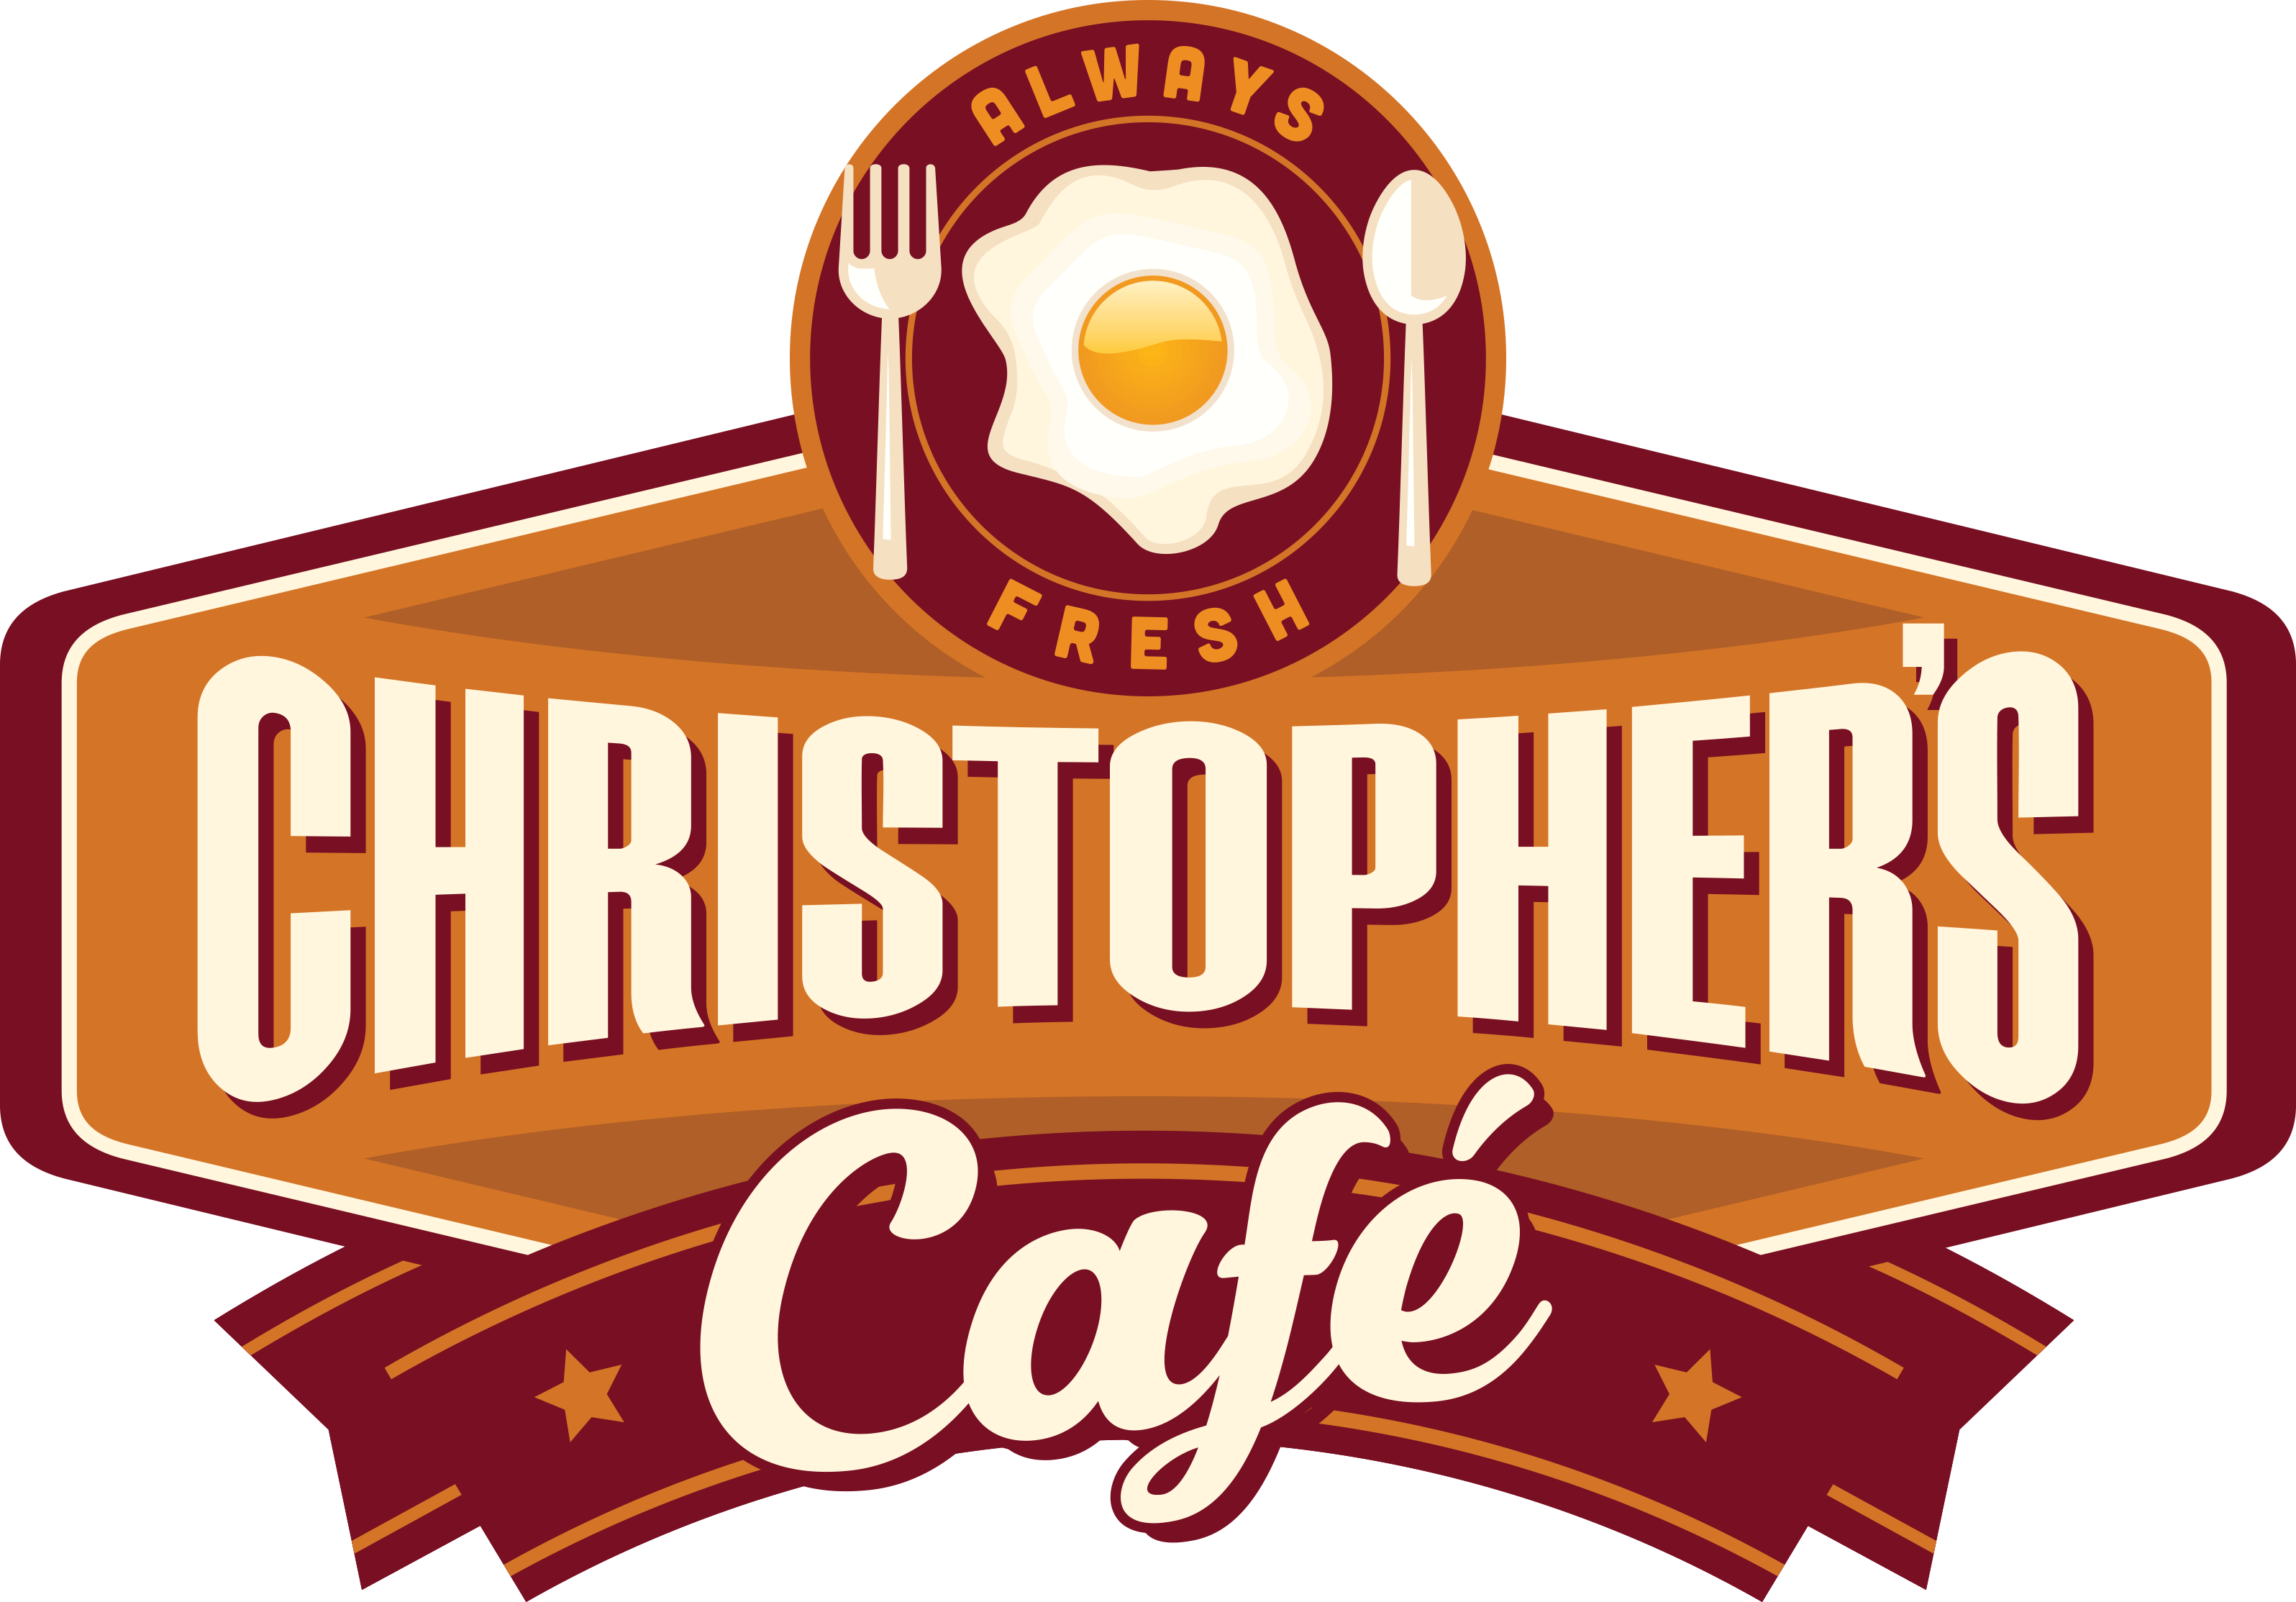 Breakfast Logo - Christopher's Downtown Cafe, Located in Indian River, Michigan